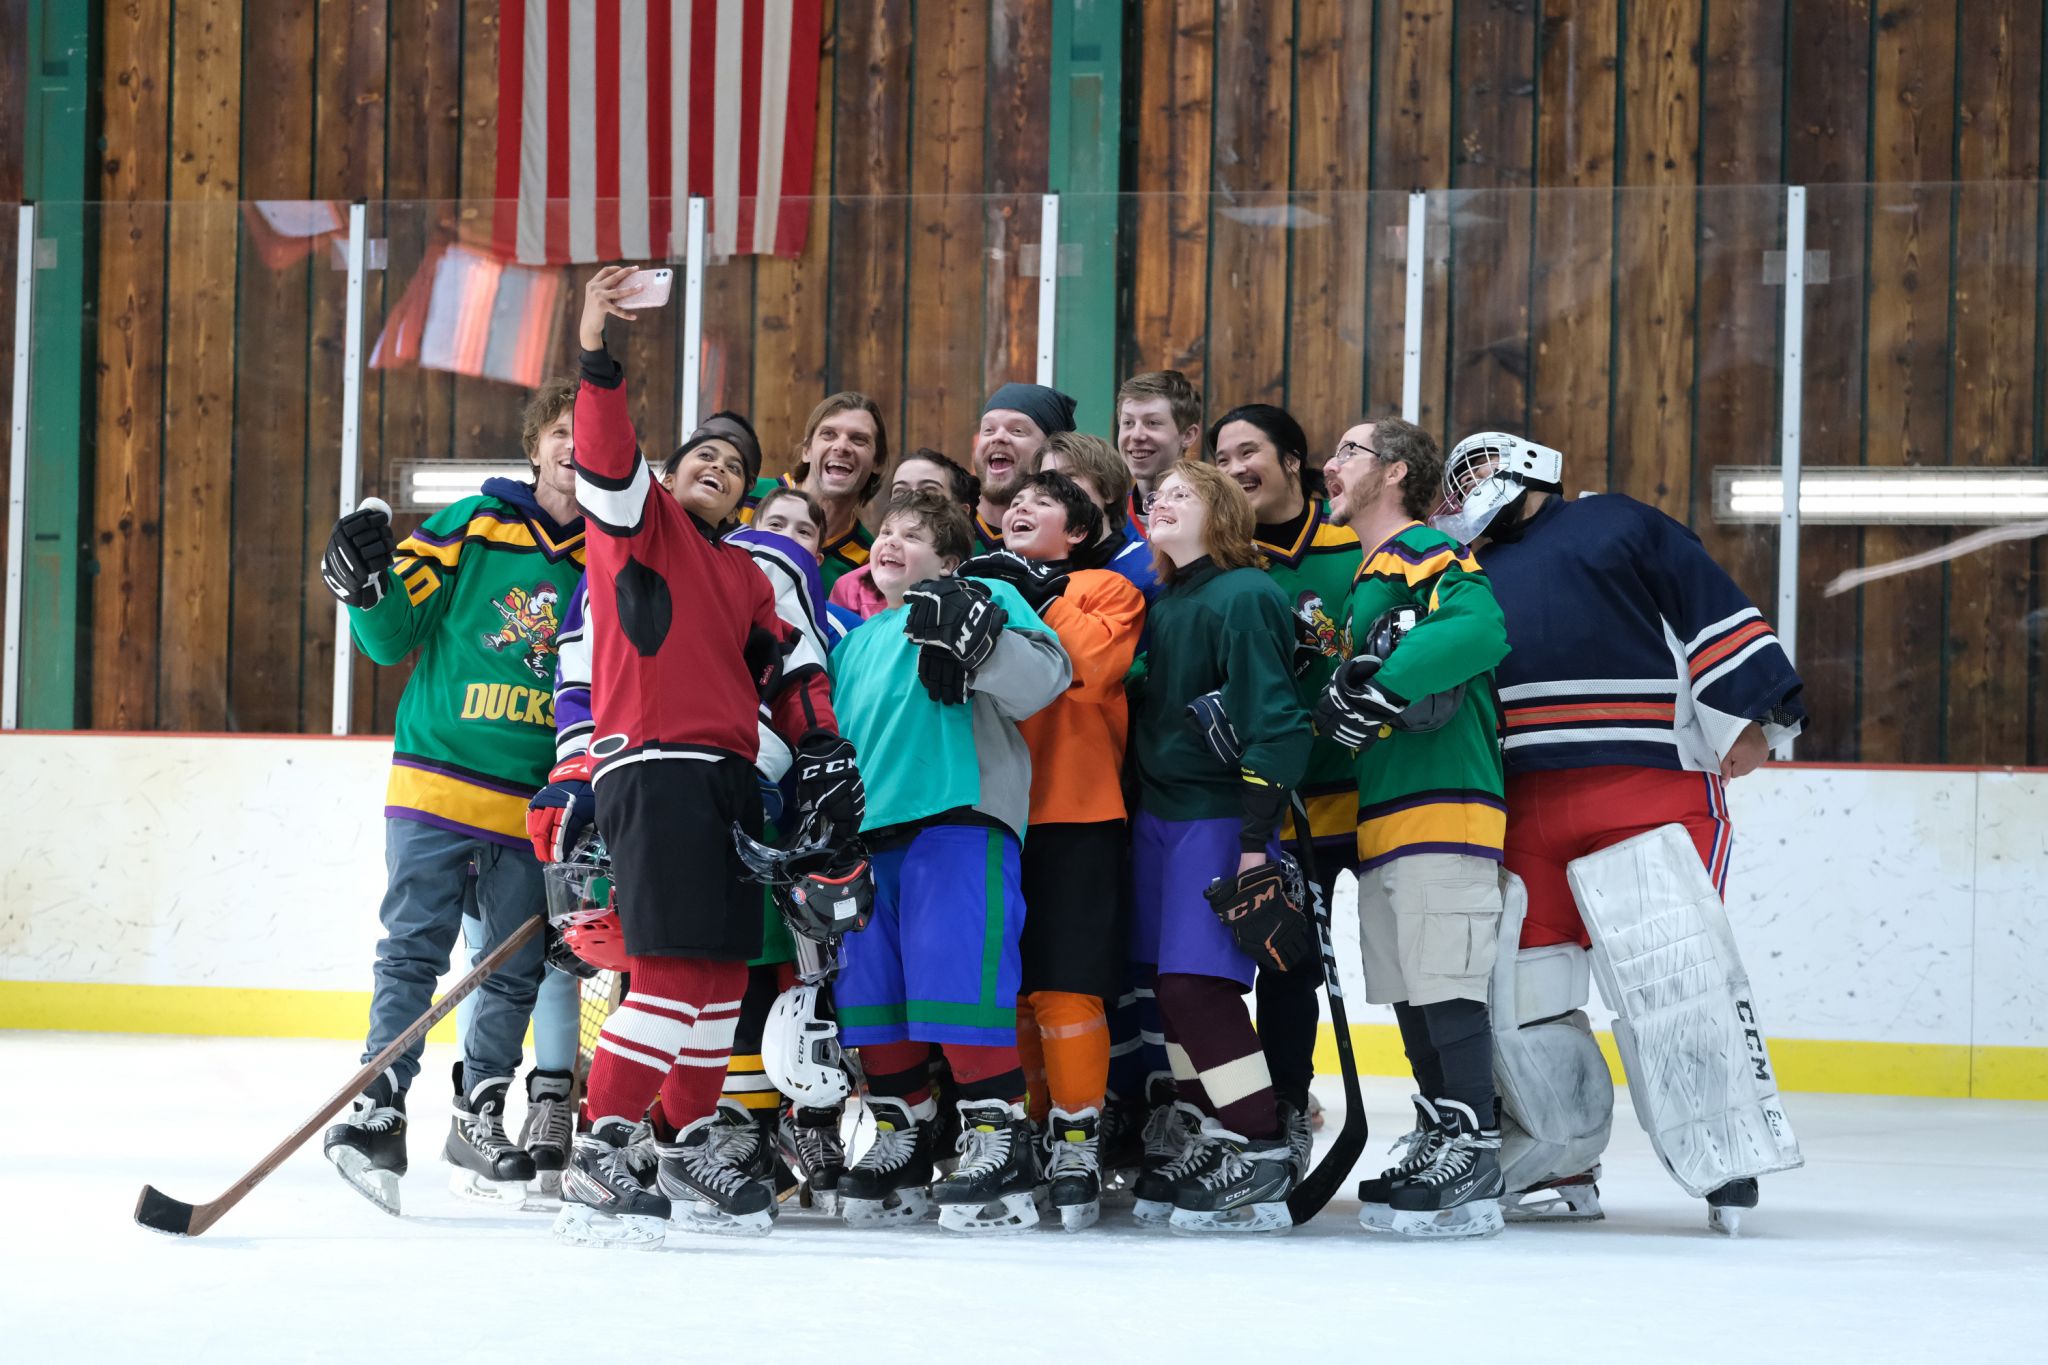 Mighty Ducks: Game Changers' on Disney Plus is leading a '90s sports movie revival